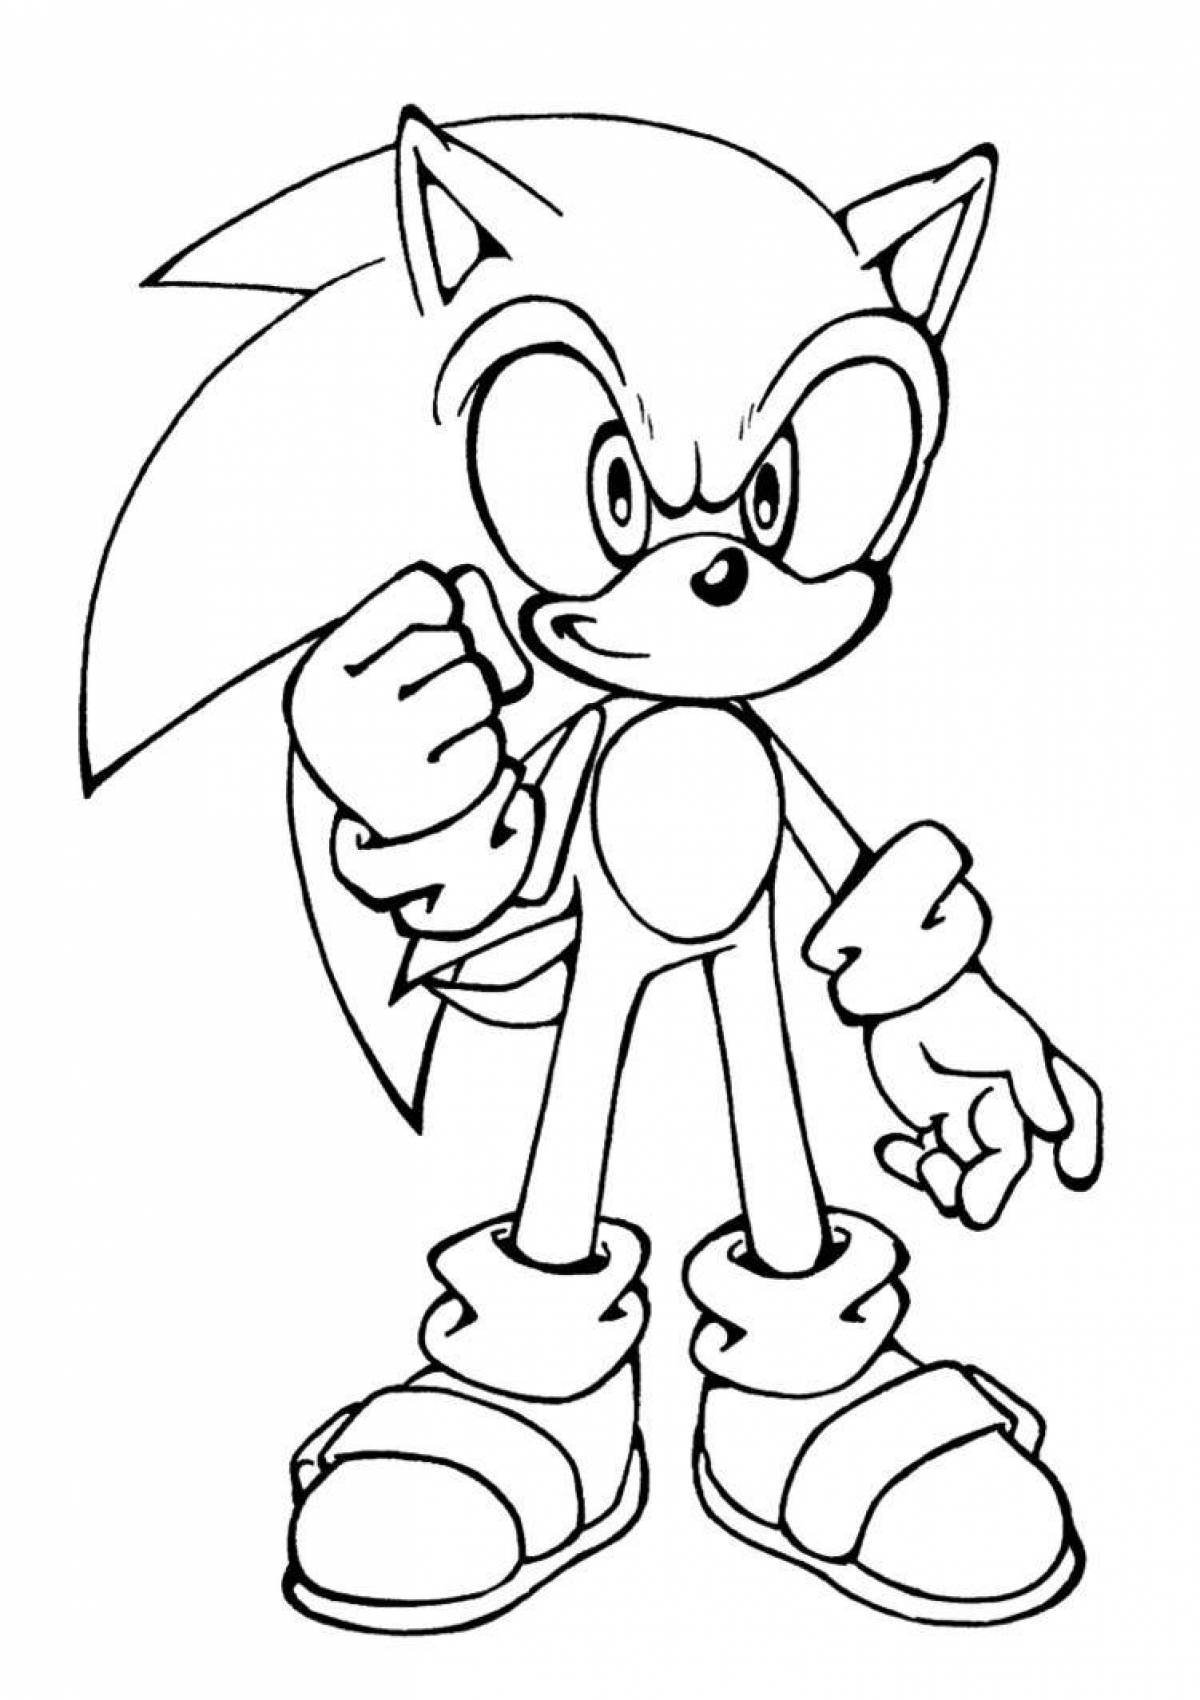 Witty sonic exe coloring book for kids